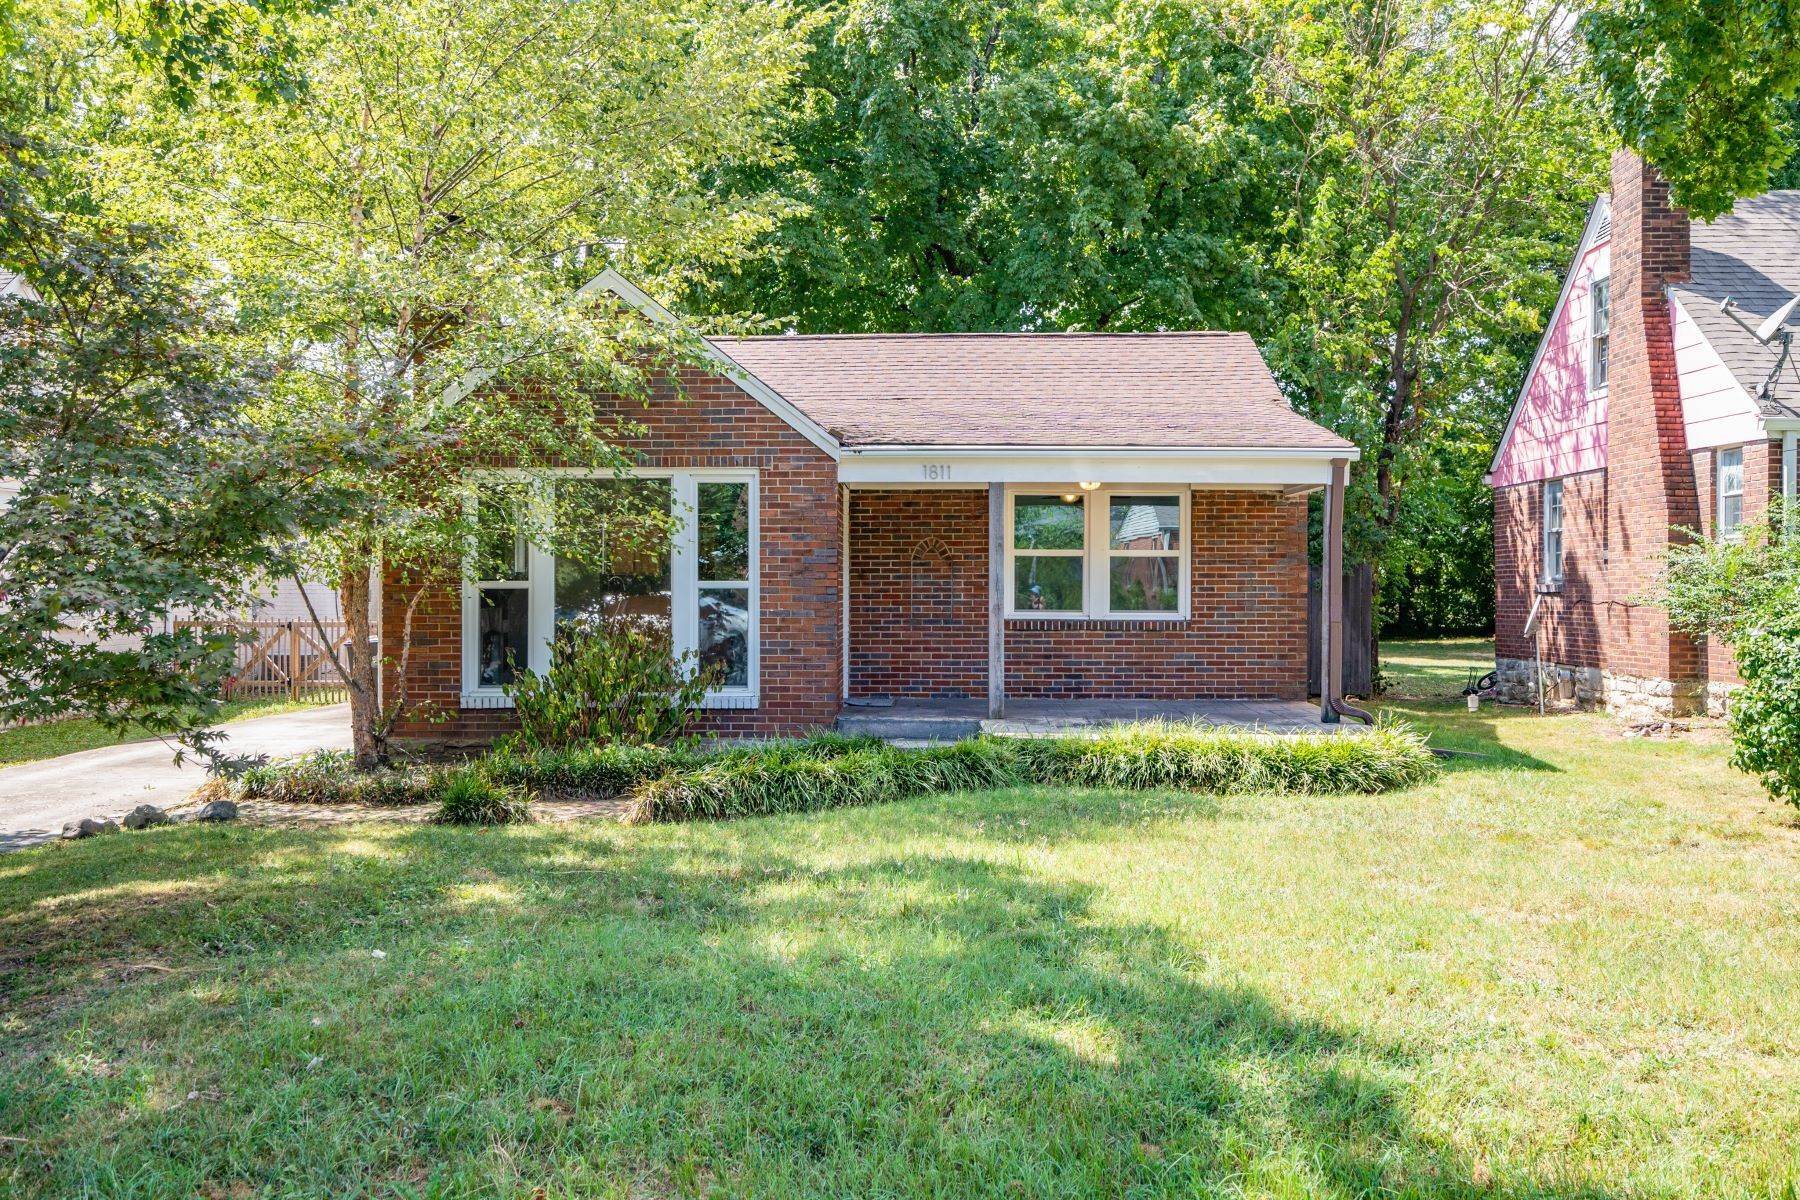 Single Family Homes for Sale at 1811 Stewart Pl, Nashville, TN, 37203 1811 Stewart Pl Nashville, Tennessee 37203 United States